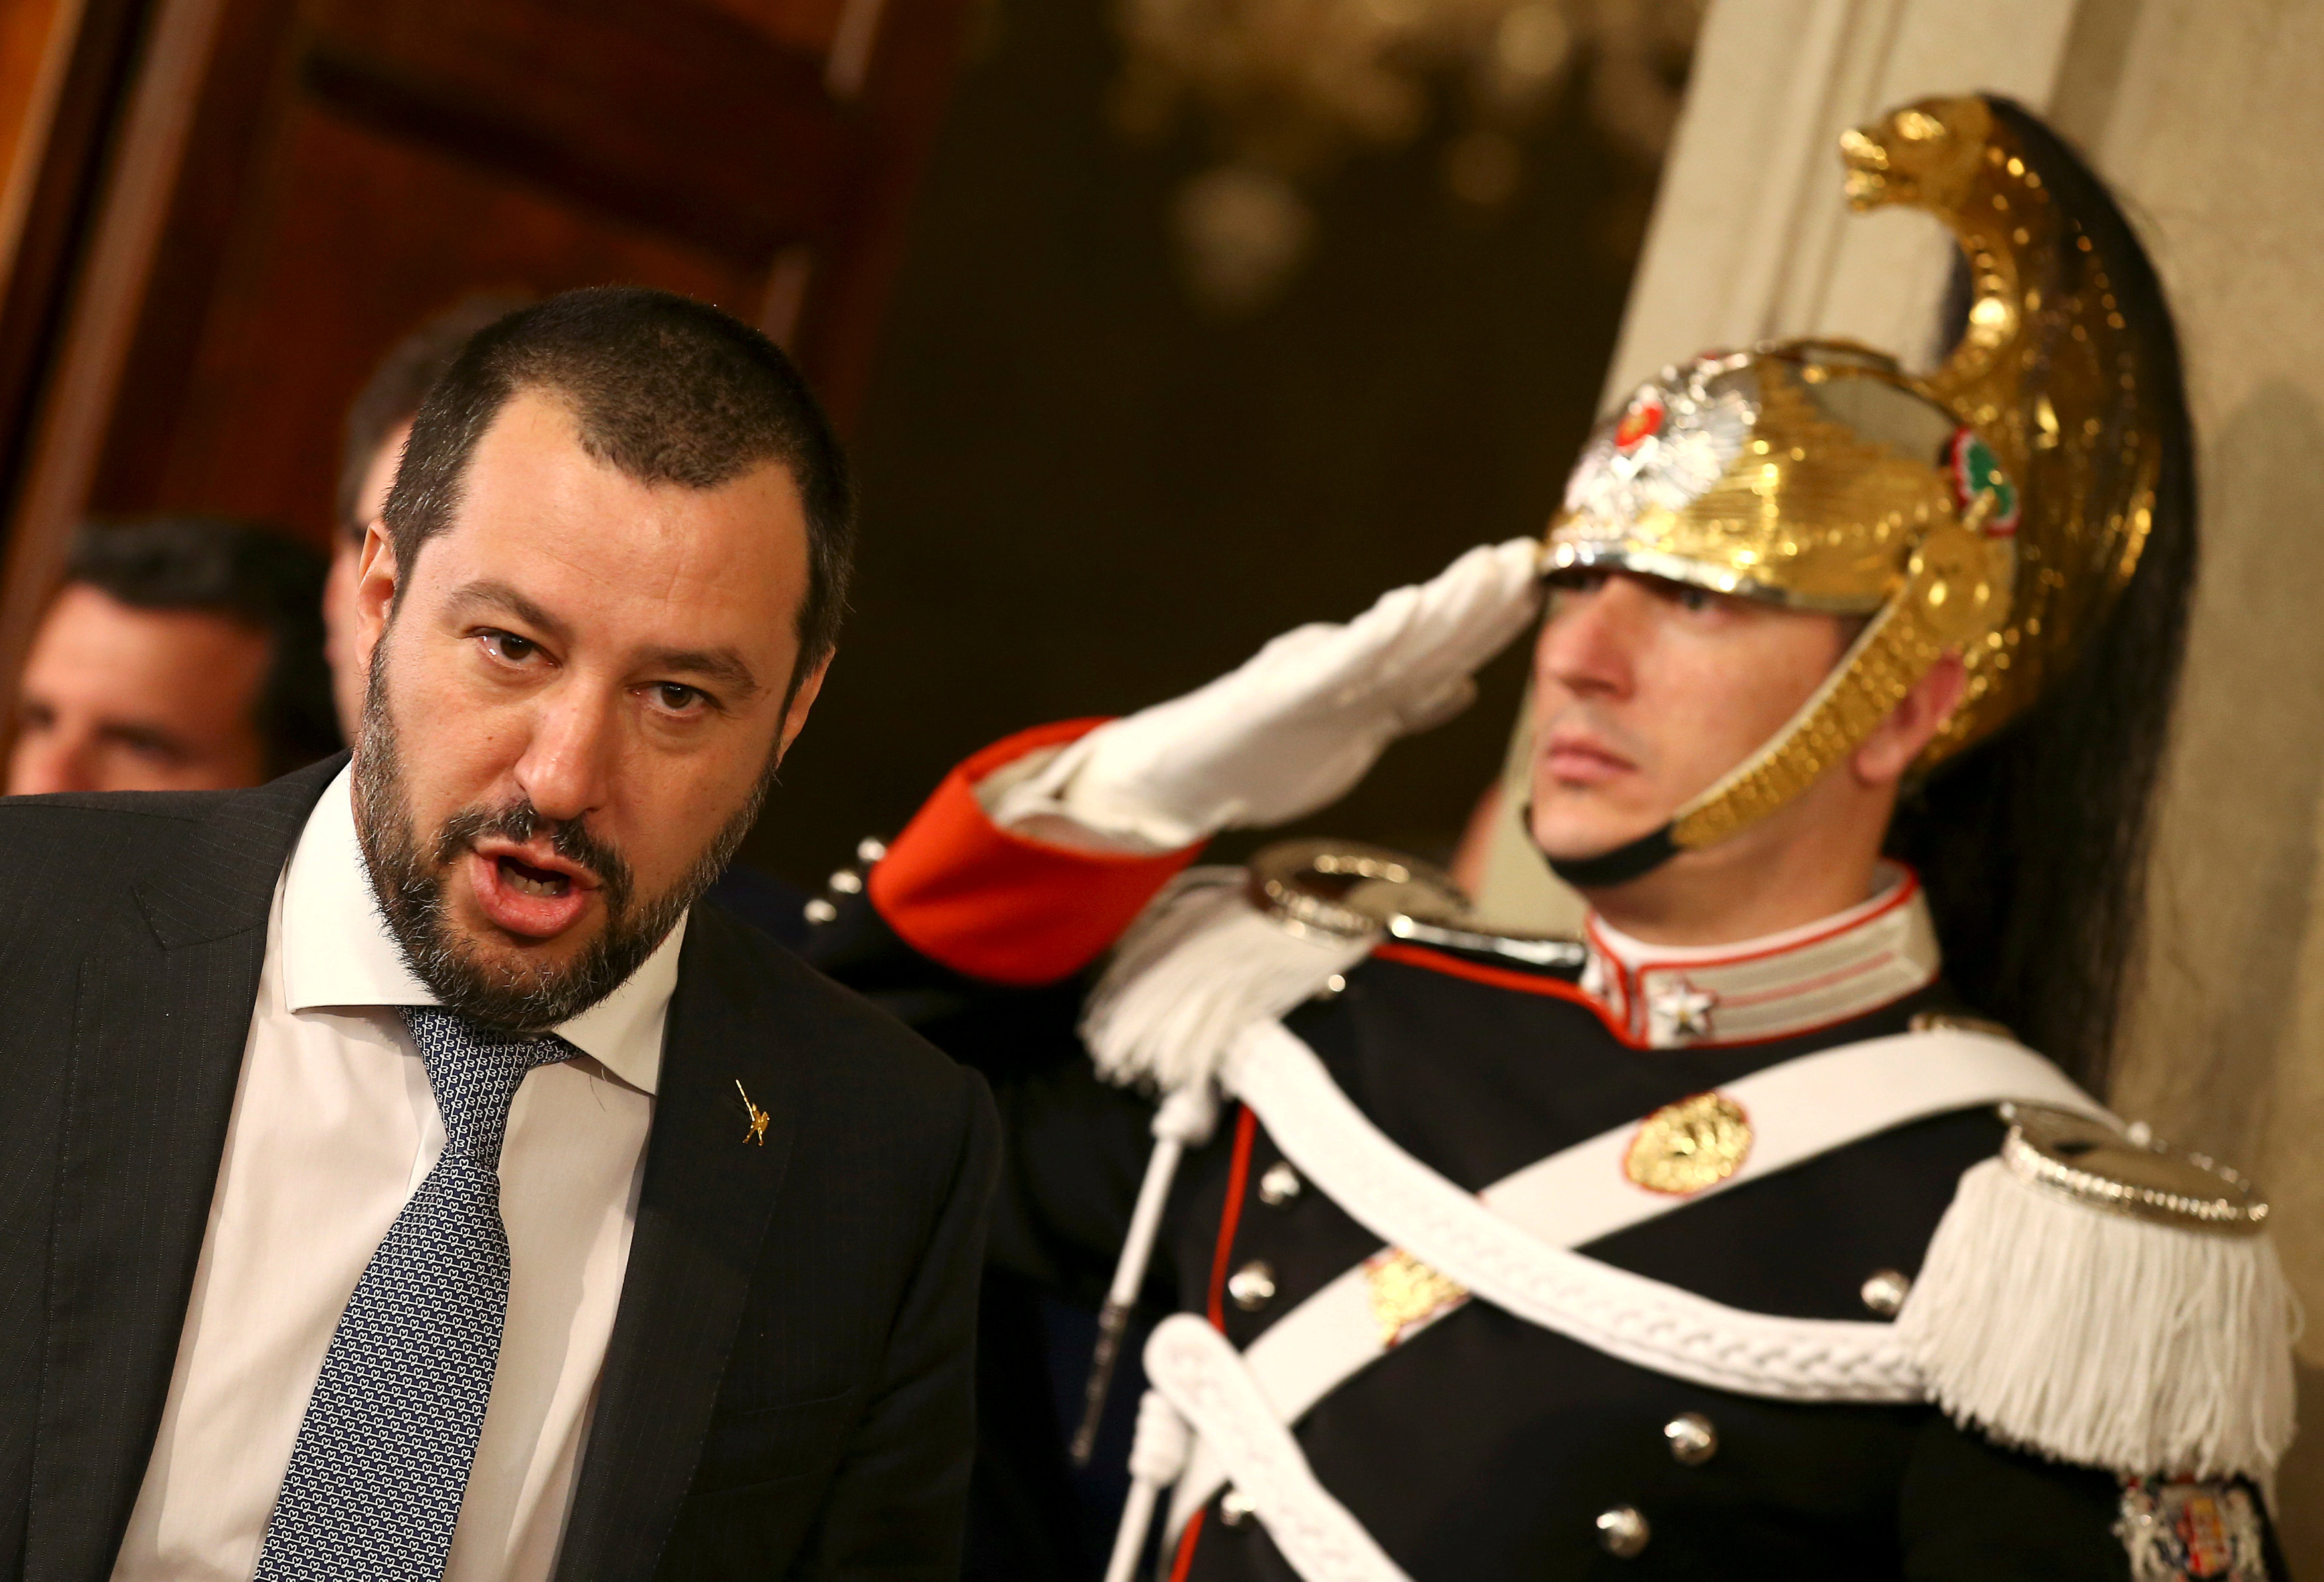 League calls on Italians to back coalition deal with 5-Star